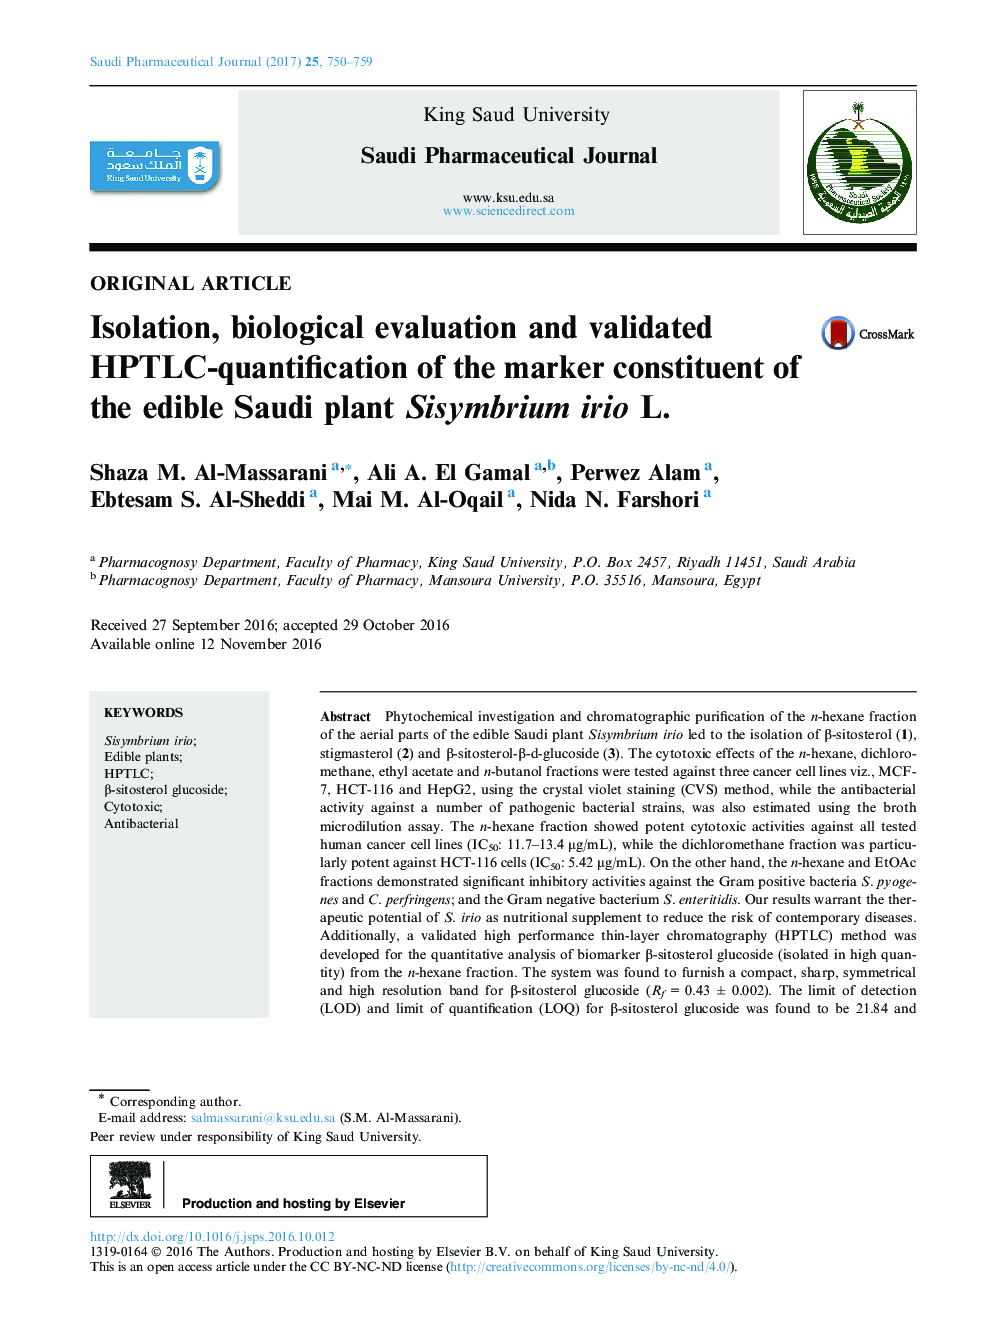 Isolation, biological evaluation and validated HPTLC-quantification of the marker constituent of the edible Saudi plant Sisymbrium irio L.